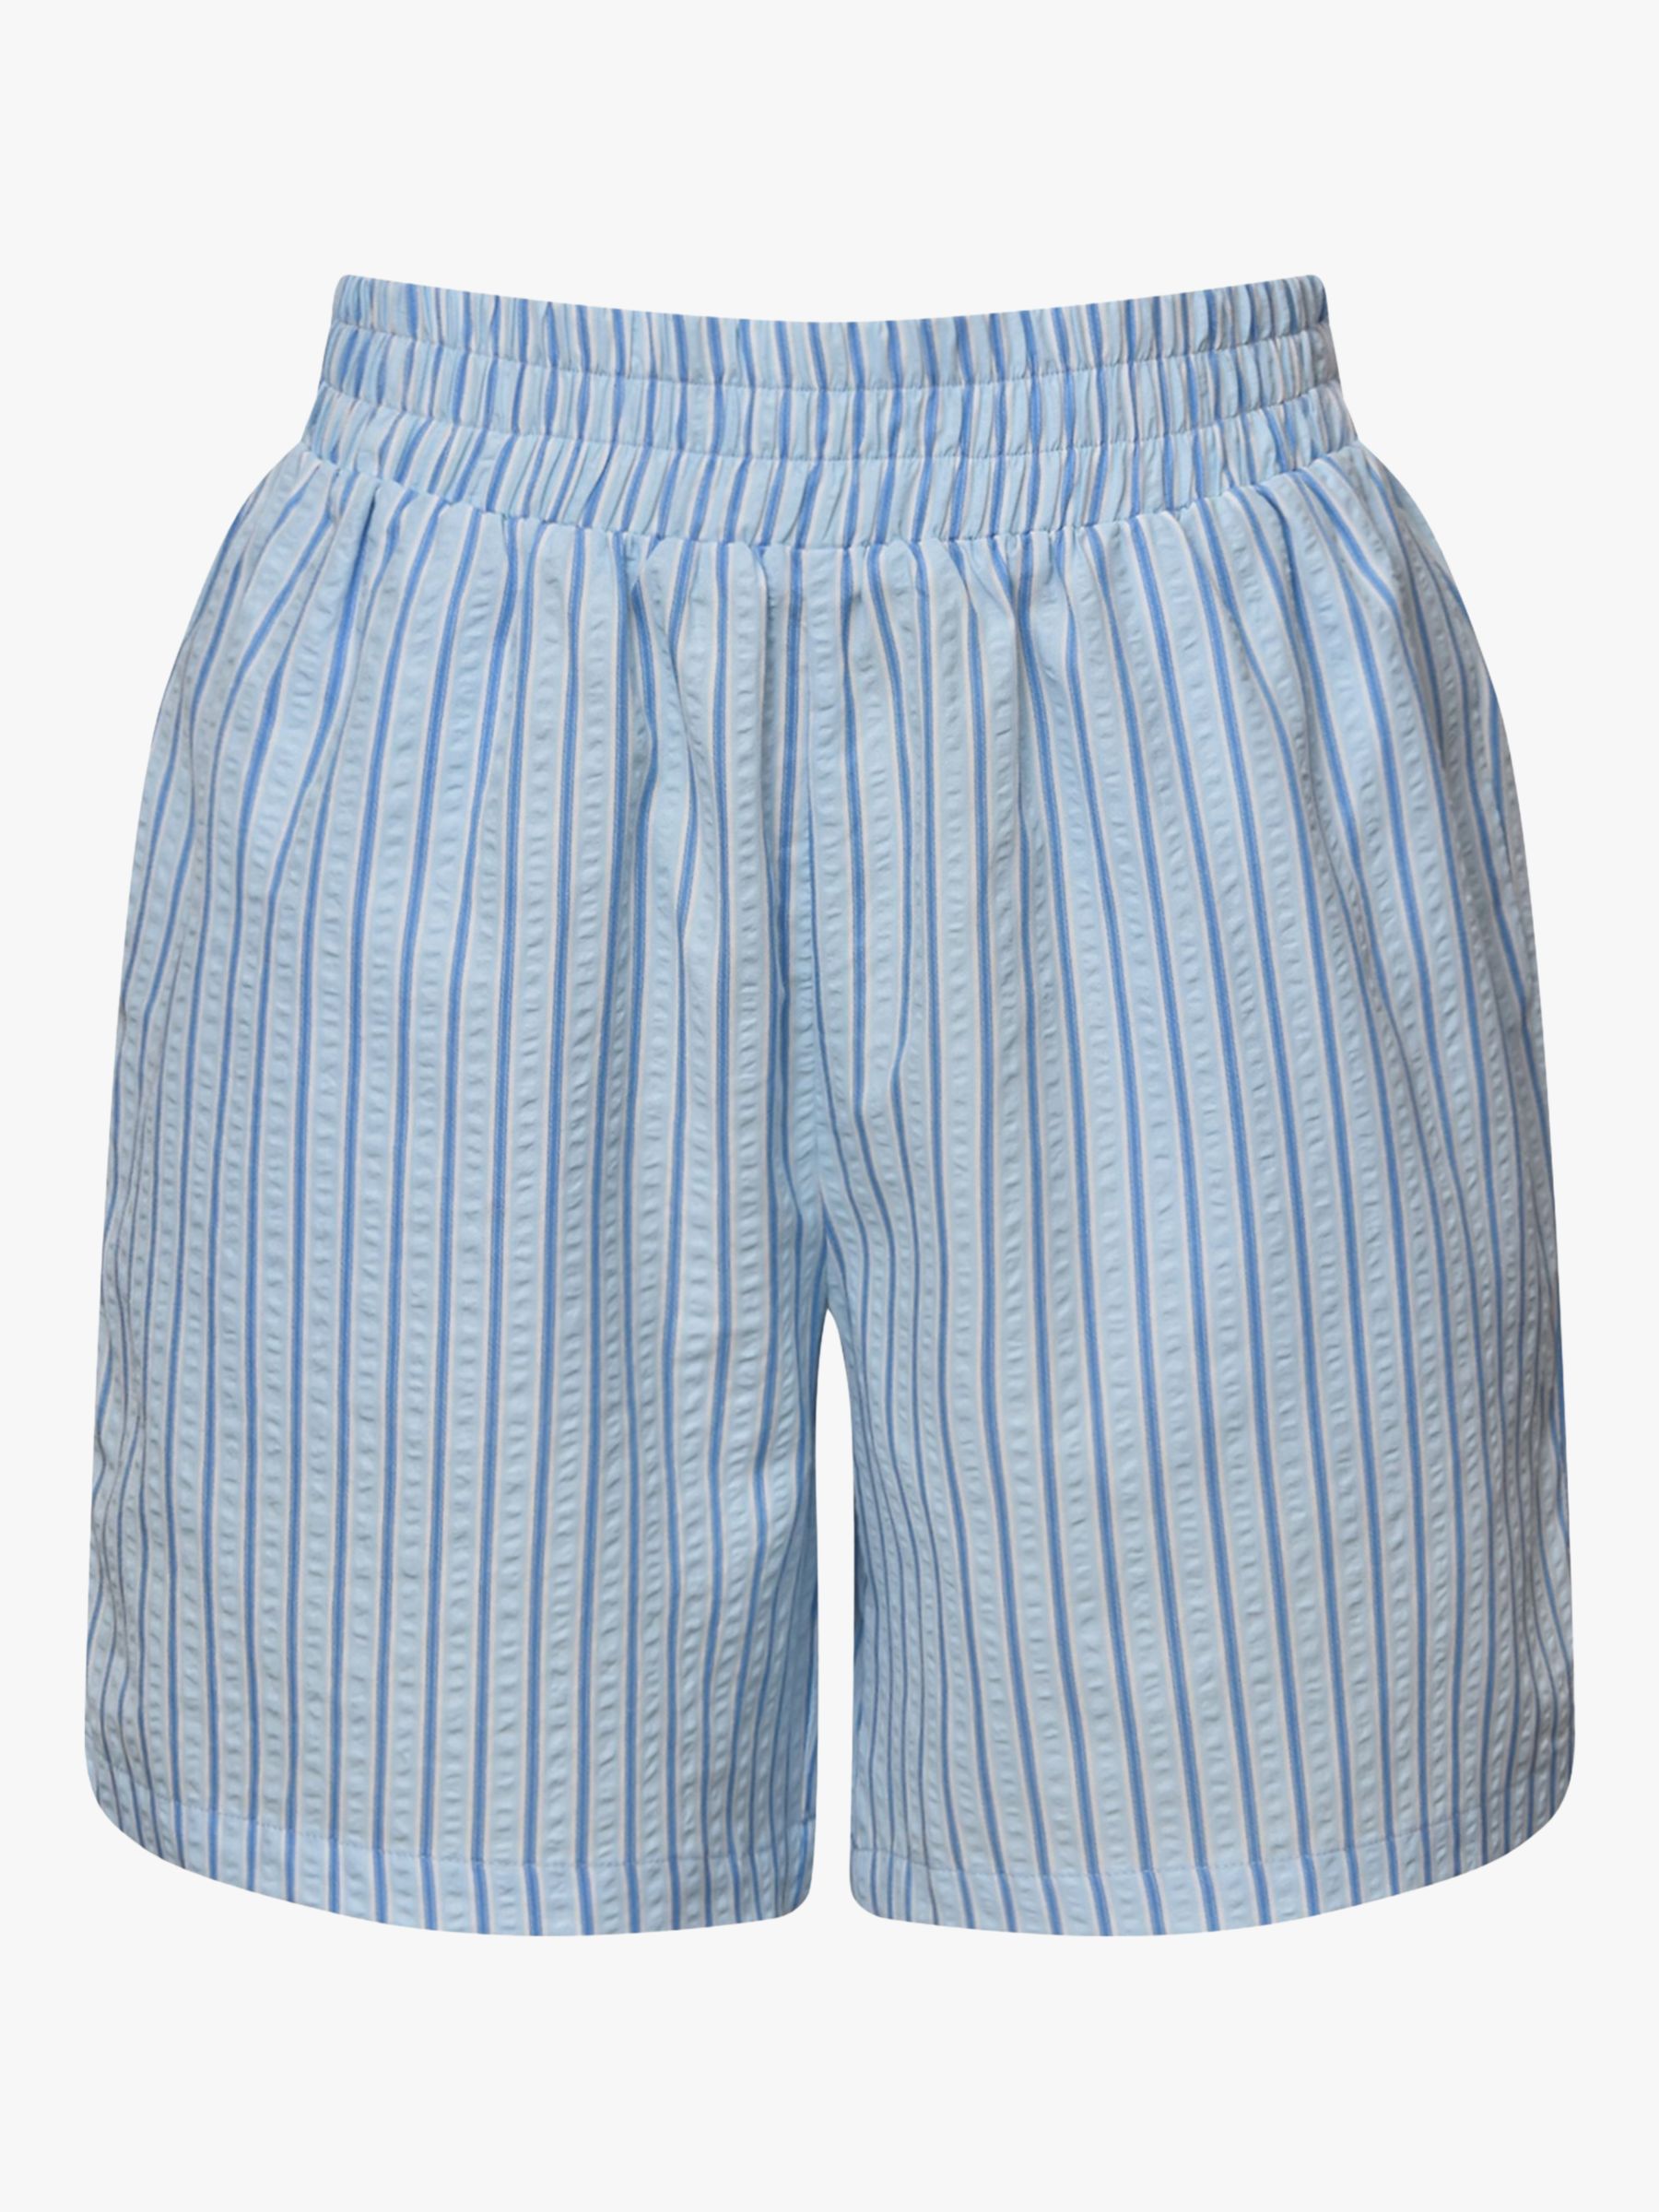 Buy A-VIEW Bell Cotton Blend Stripe Shorts, Blue Online at johnlewis.com